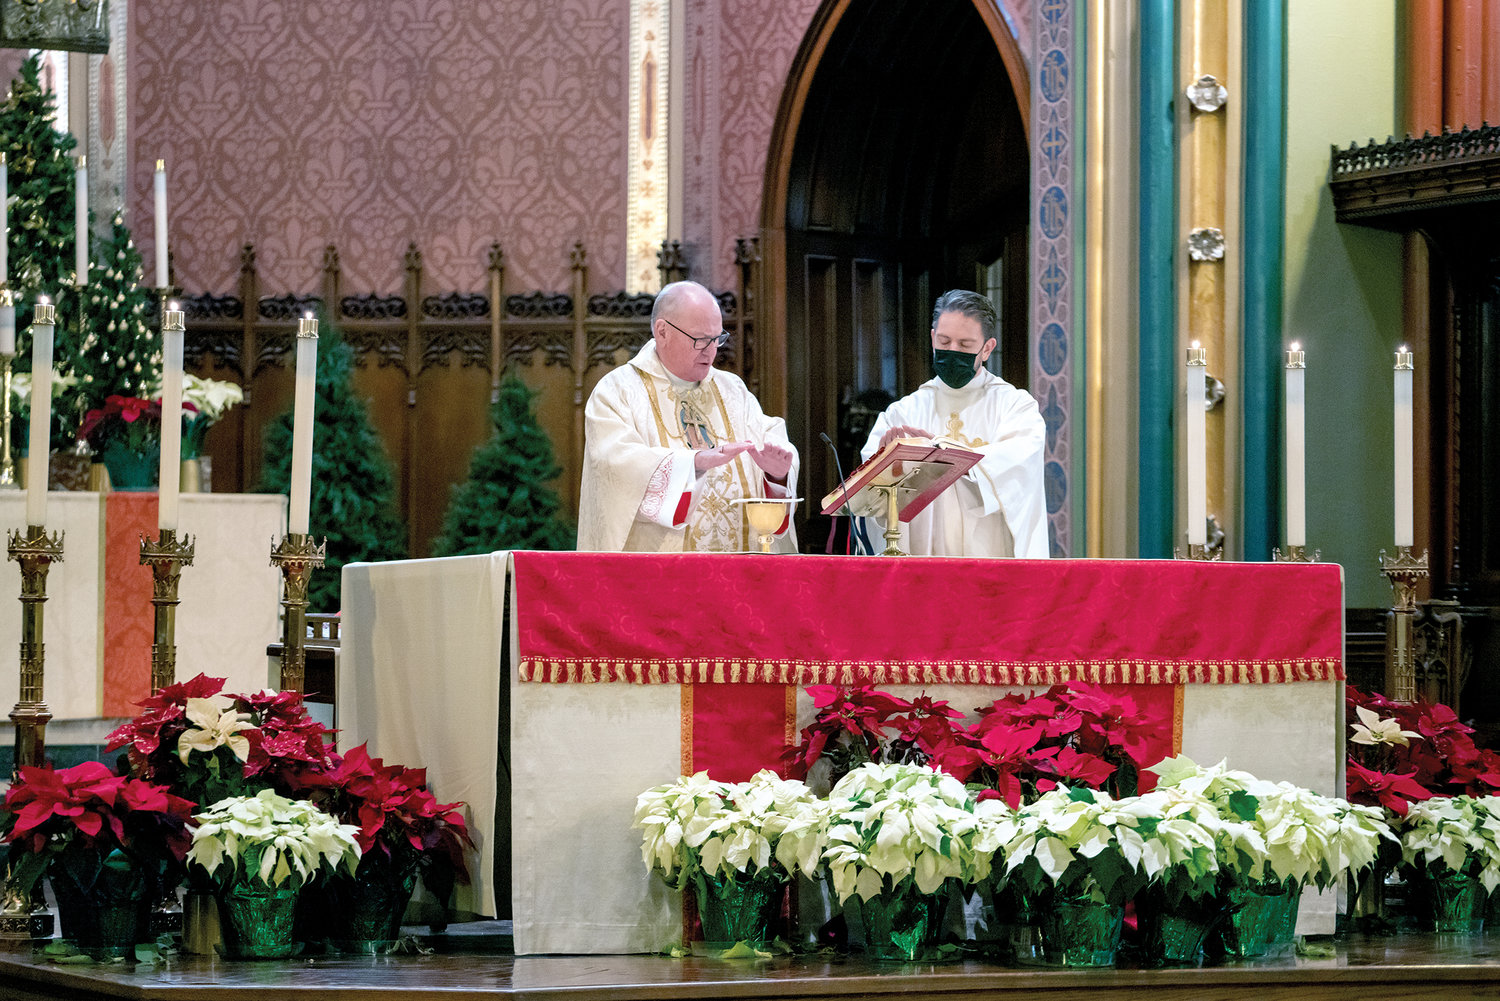 Cardinal Dolan offers Mass at St. Mary’s. His priest secretary, Father Stephen Ries, joins him at the altar.